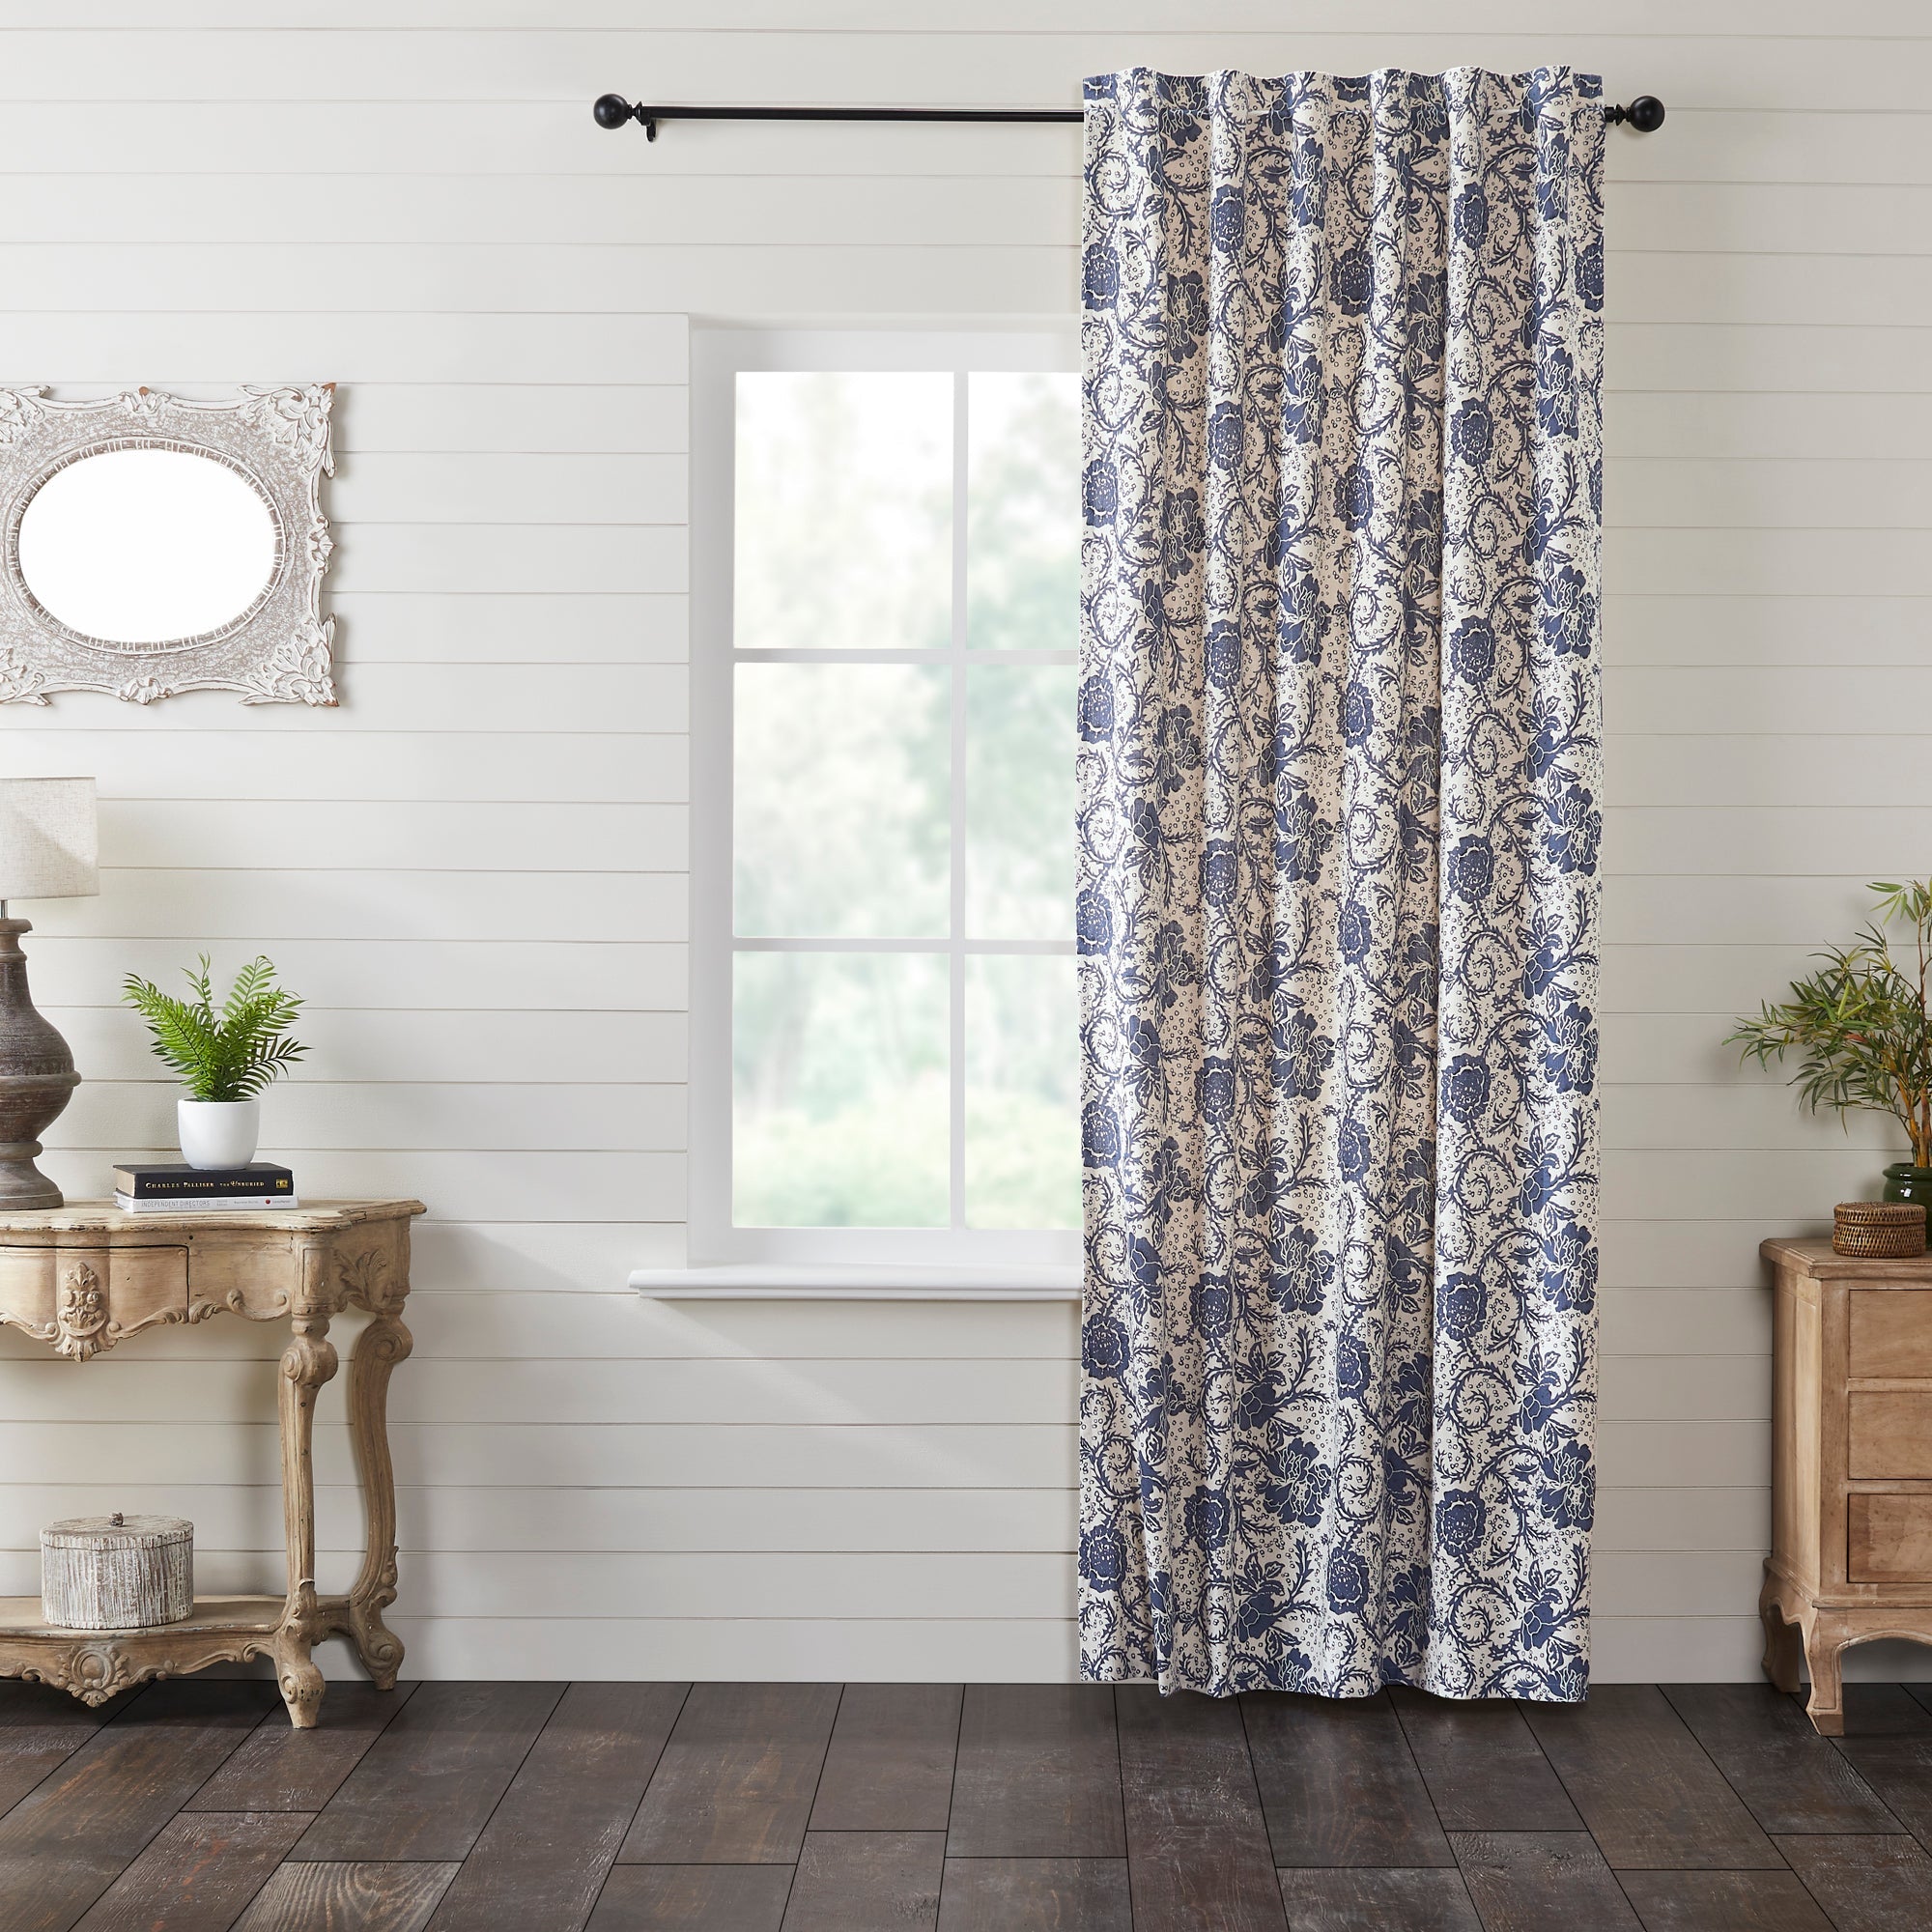 Dorset Navy Floral Panel Curtain 96x50 VHC Brands